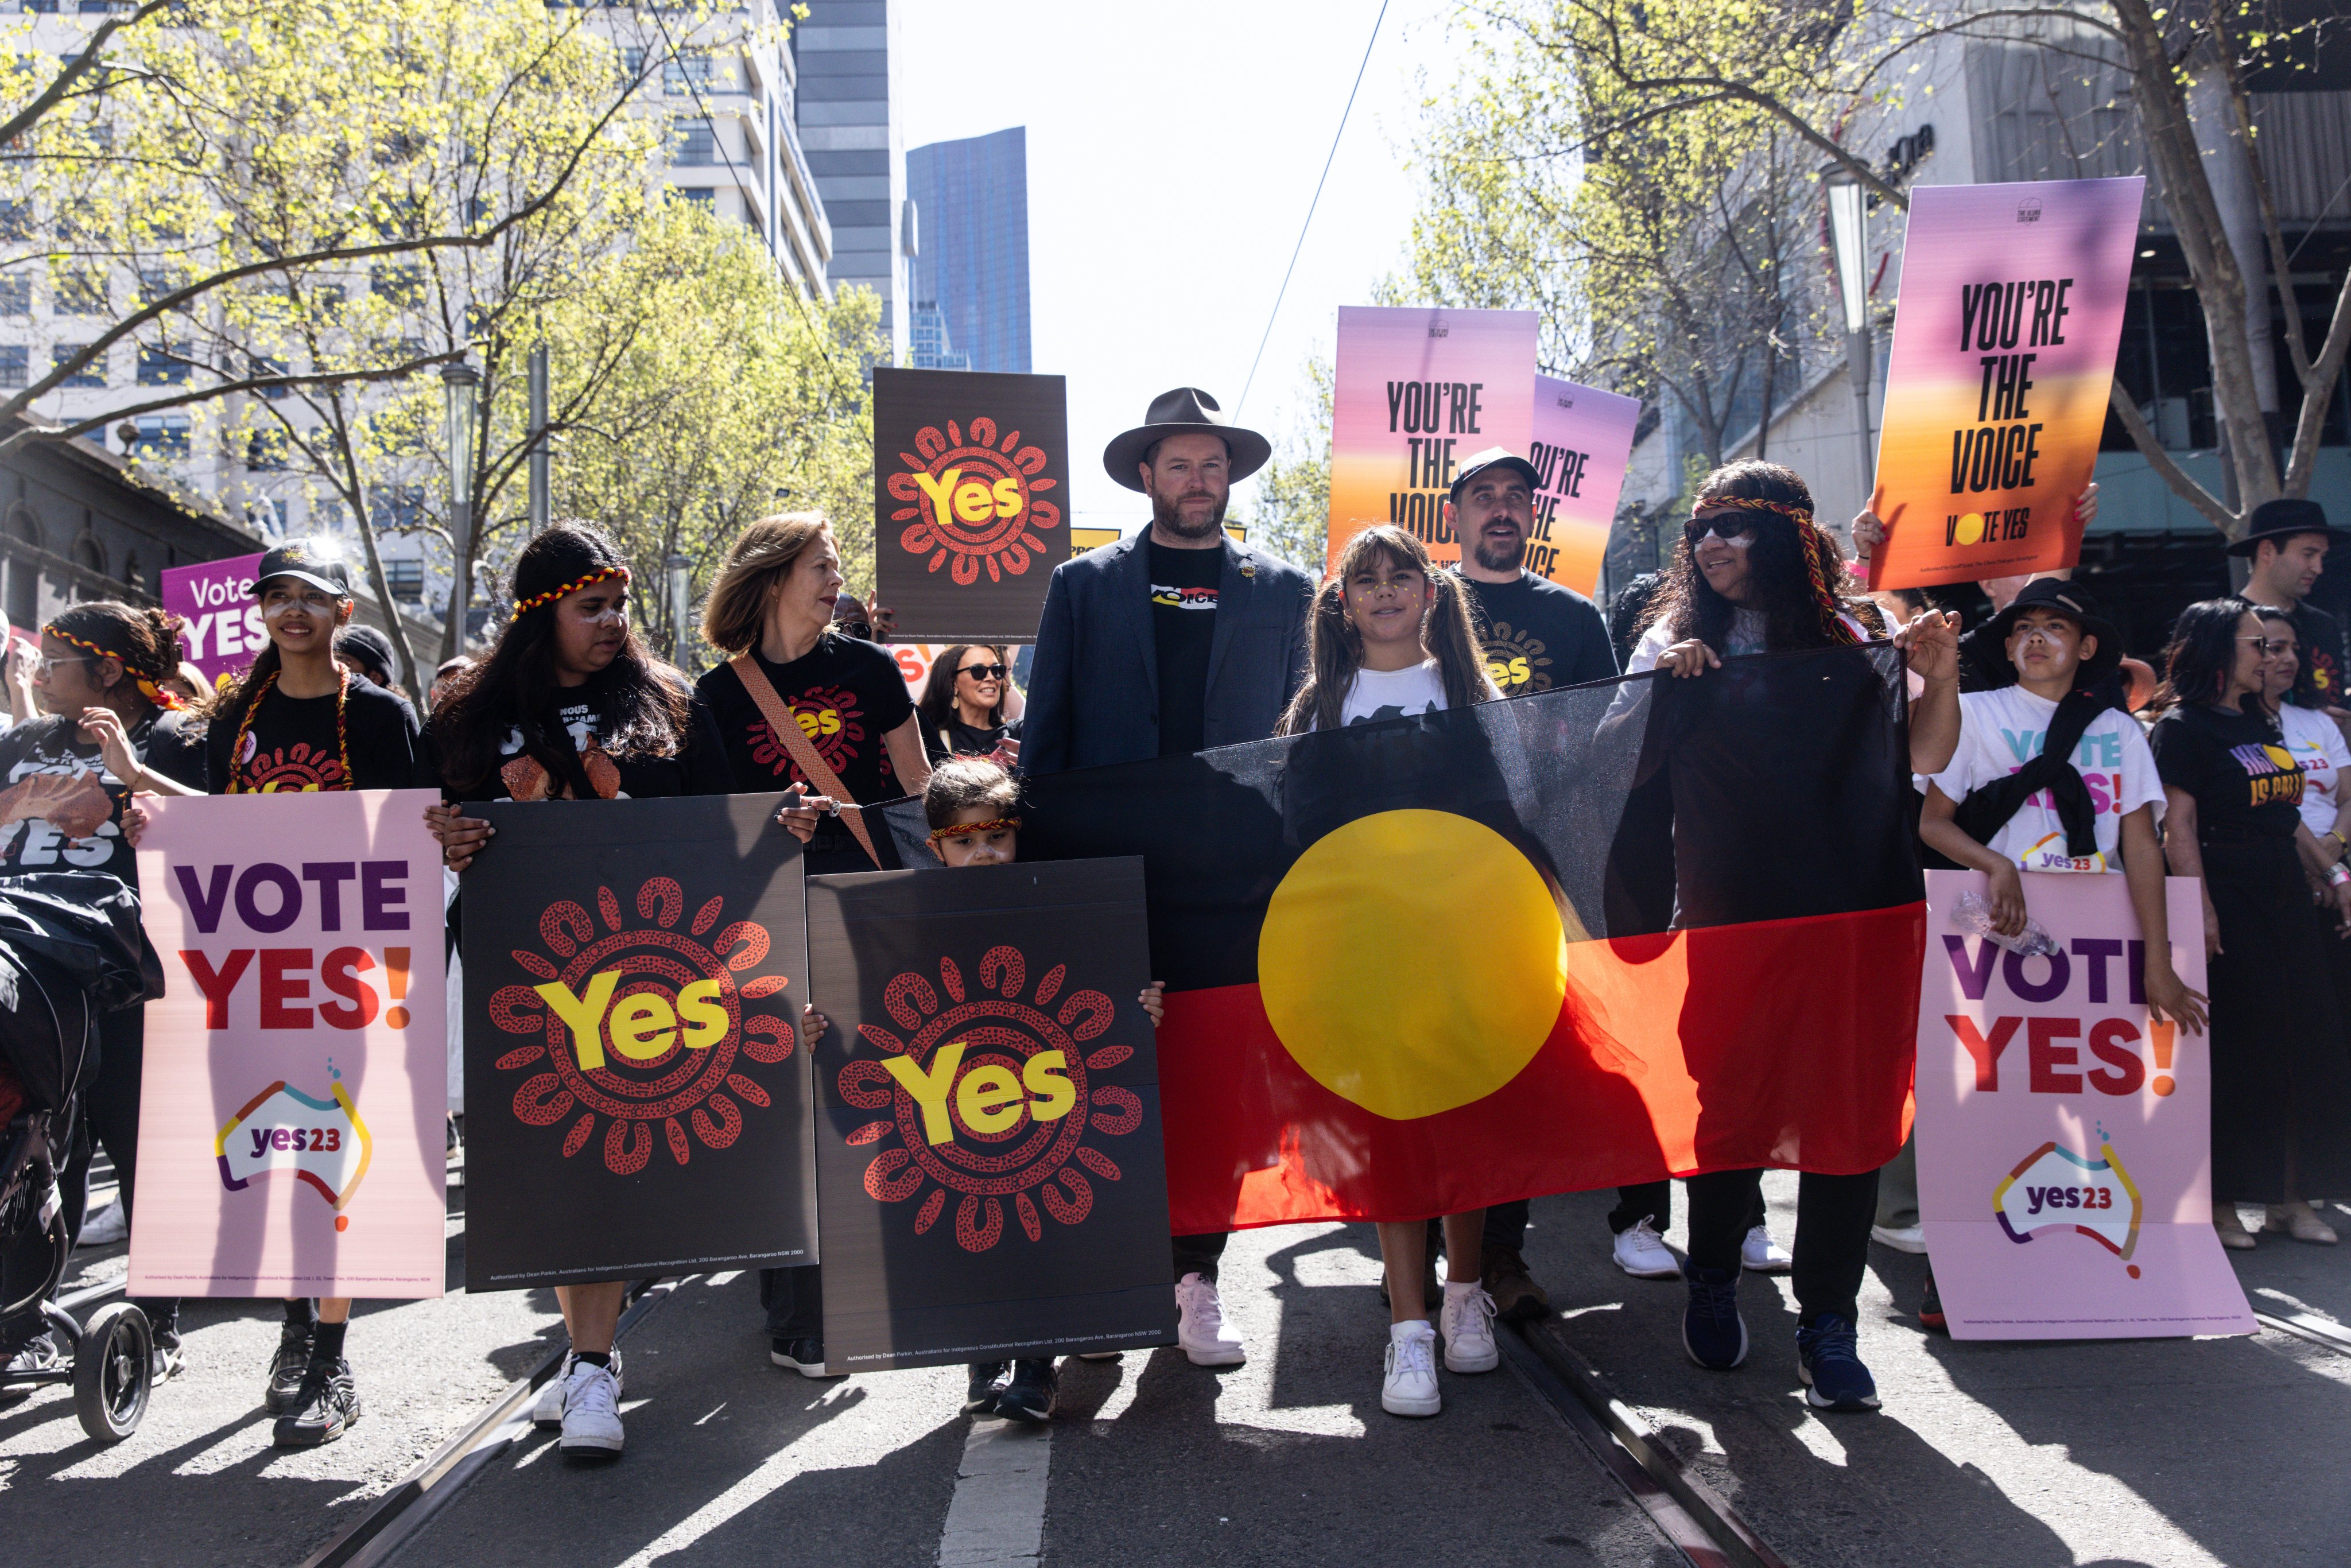 Supporters of the “yes” campaign are seen during a walk for the Yes vote event in Melbourne, Australia, on Sunday. Photo: EPA-EFE